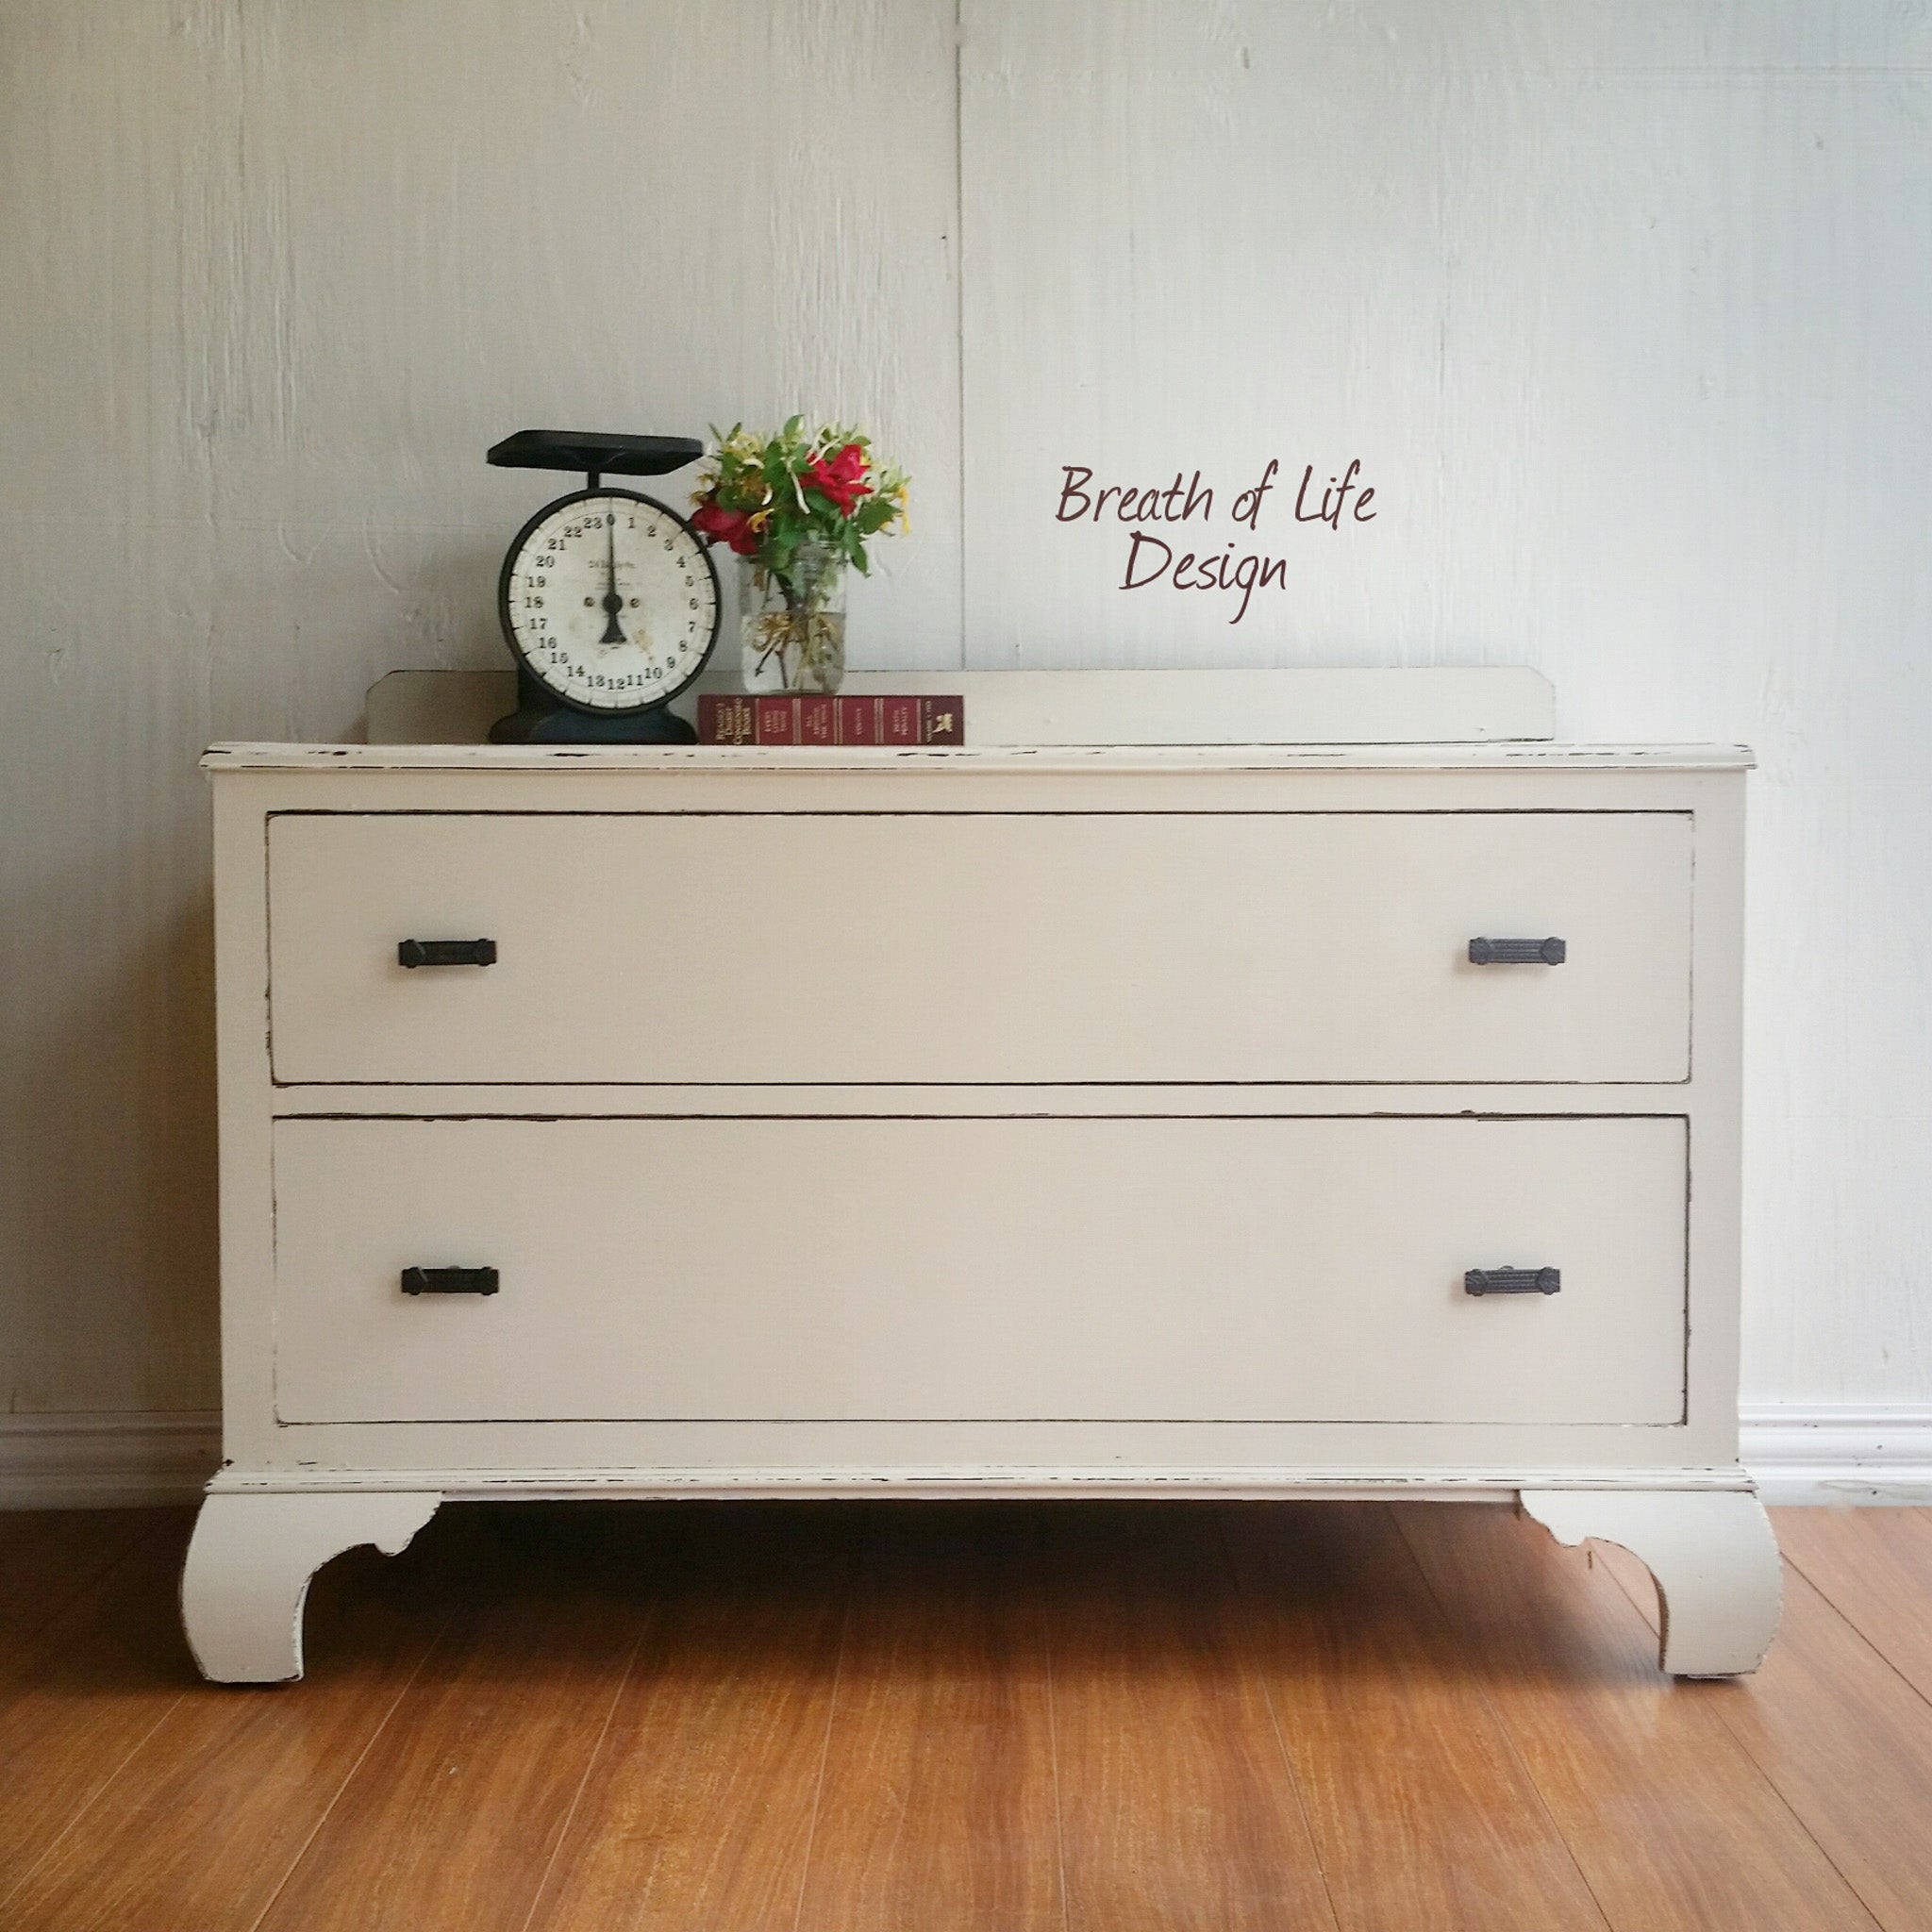 A vintage 2-drawer small dresser refurbished by Breath of Life Design is painted in Dixie Belle's Drop Cloth chalk mineral paint.